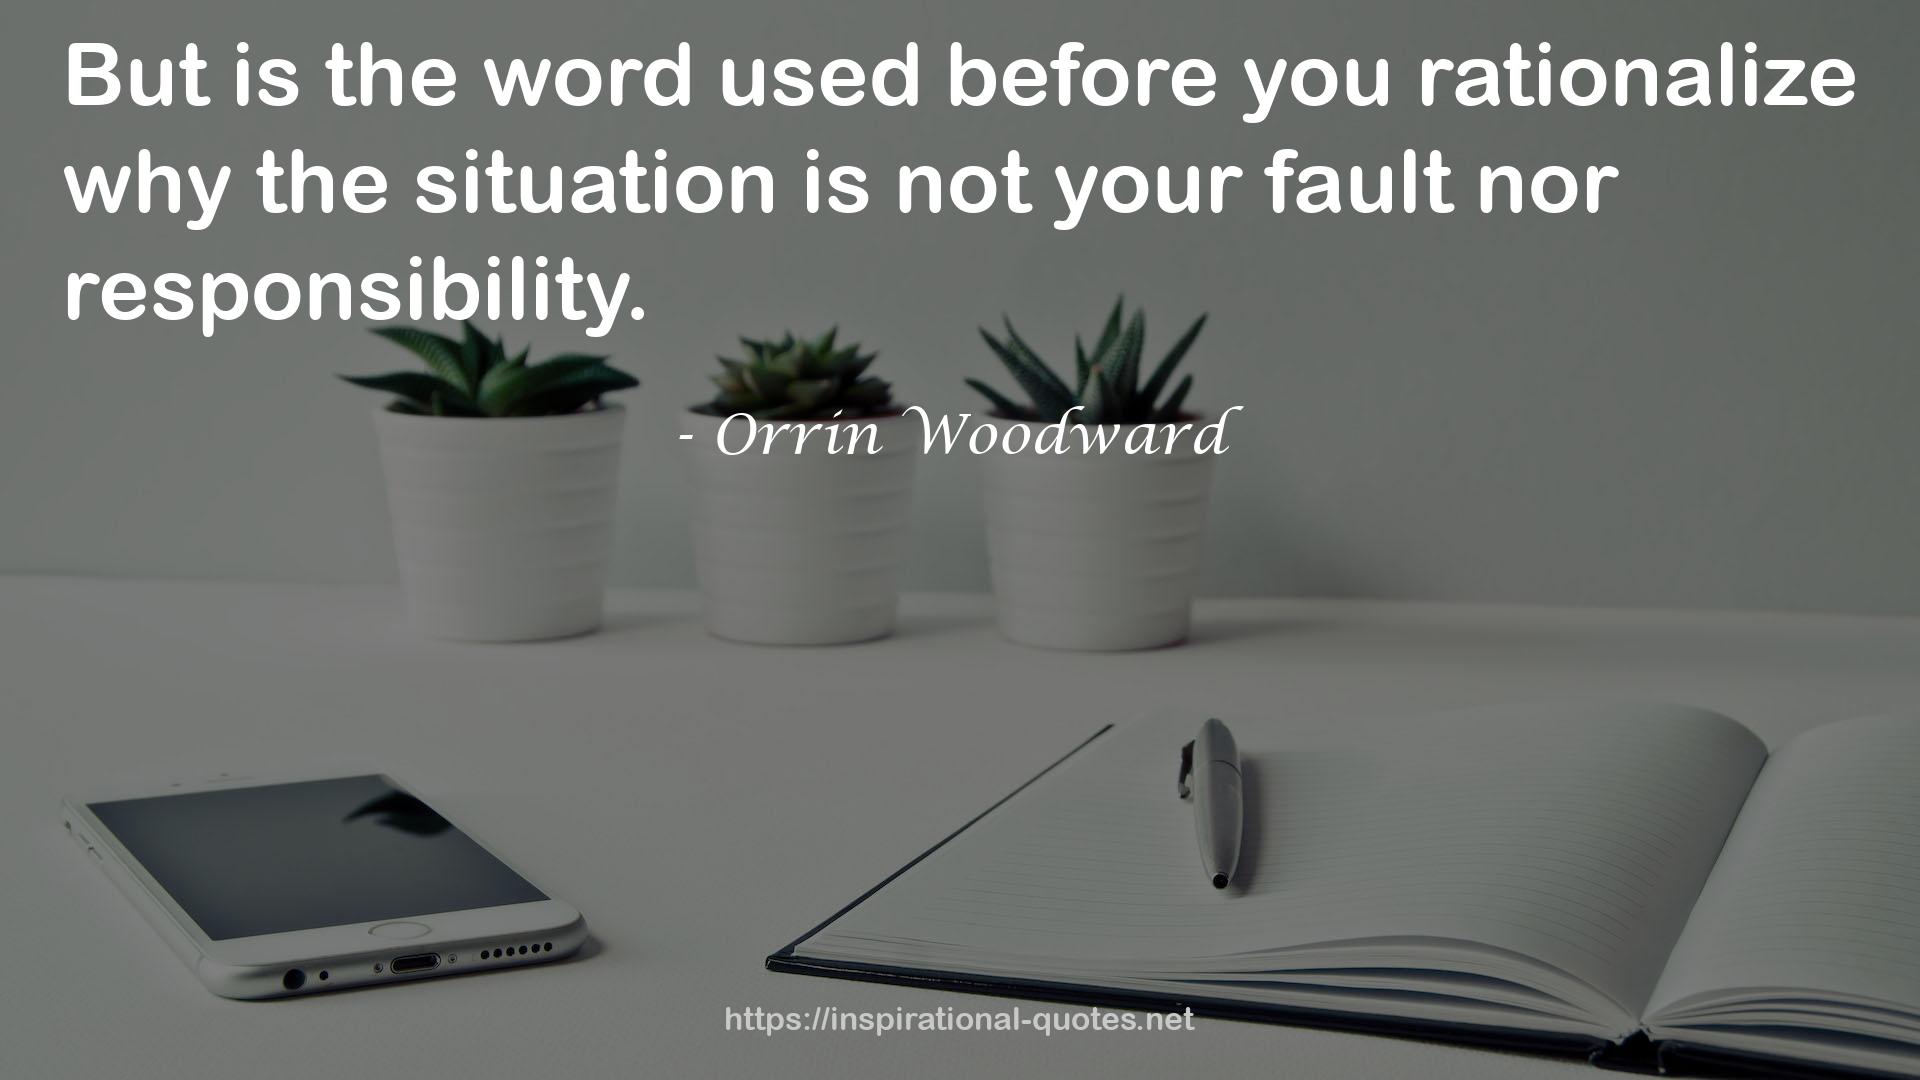 Orrin Woodward QUOTES